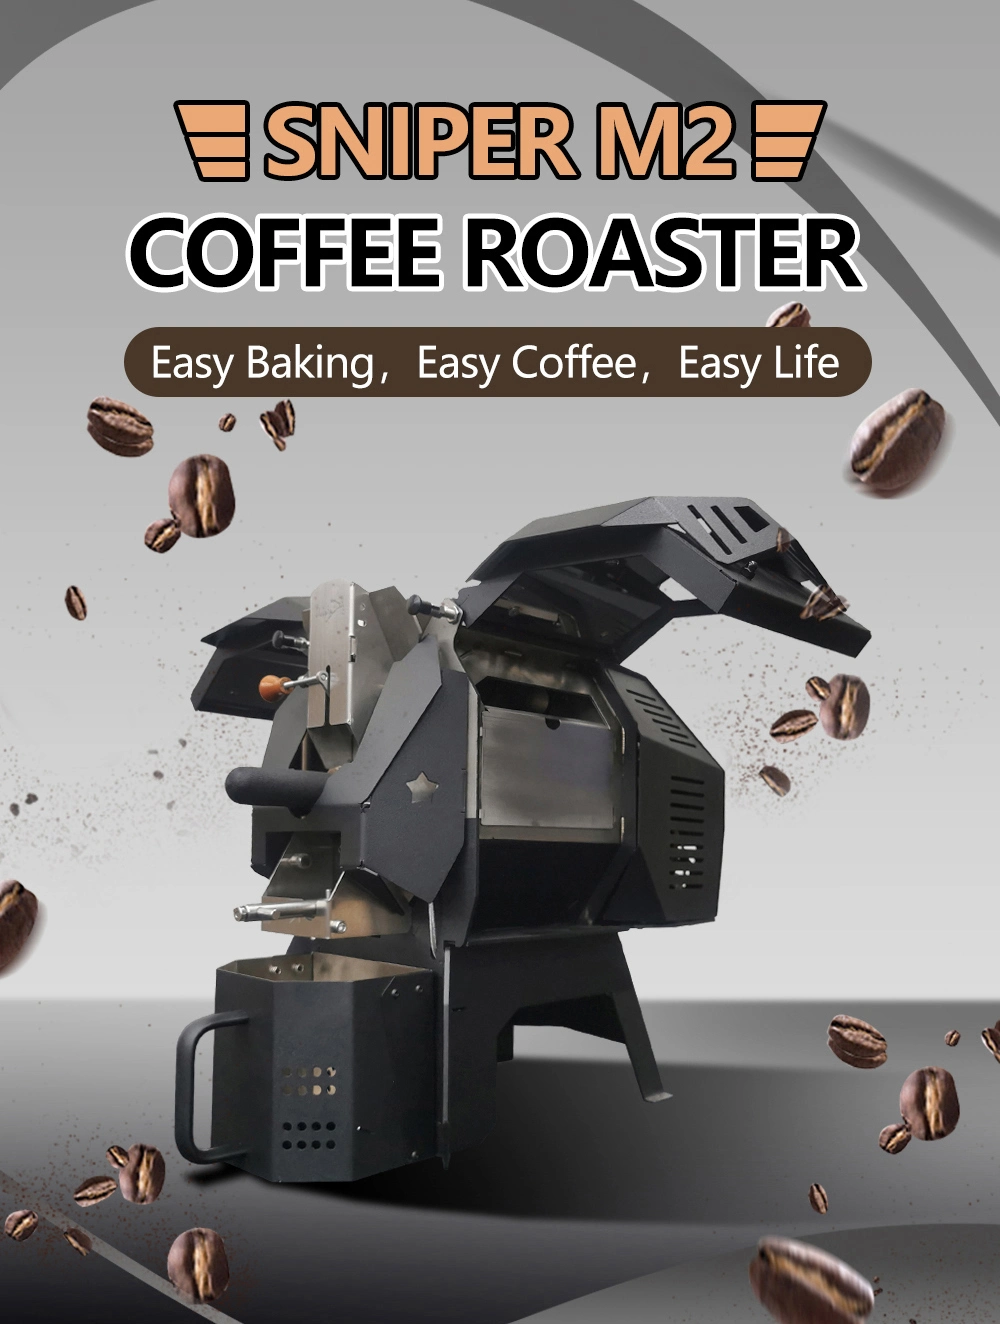 Hot Sale Retro Home Manual Coffee Bean Roasting Machines Specialty Coffee Roasters in China